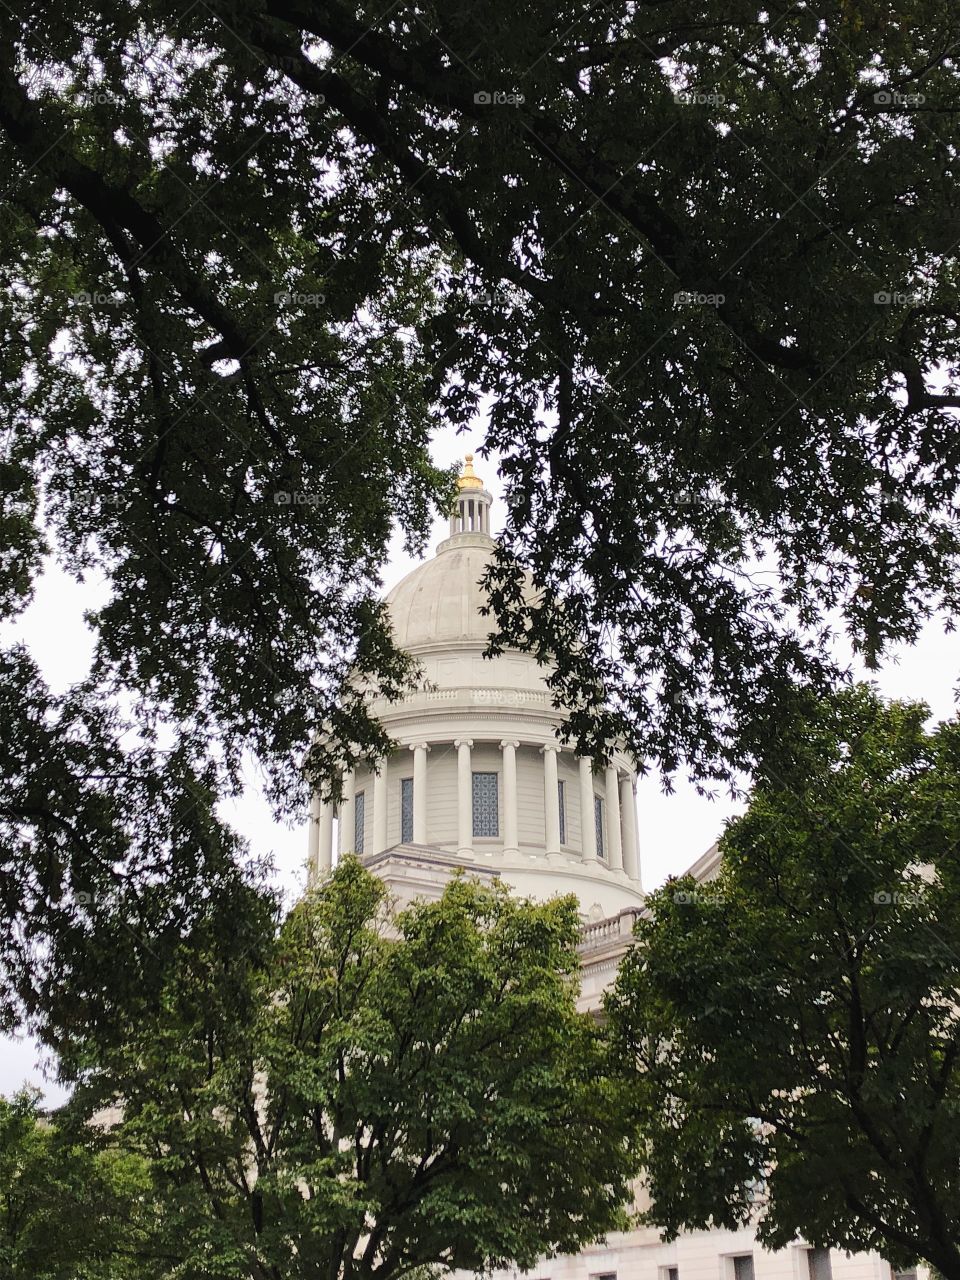 Framed by the lush green foliage of trees the Arkansas State Capital Dome and its lustrous golden tip cupola stands against a gray Monday morning. 